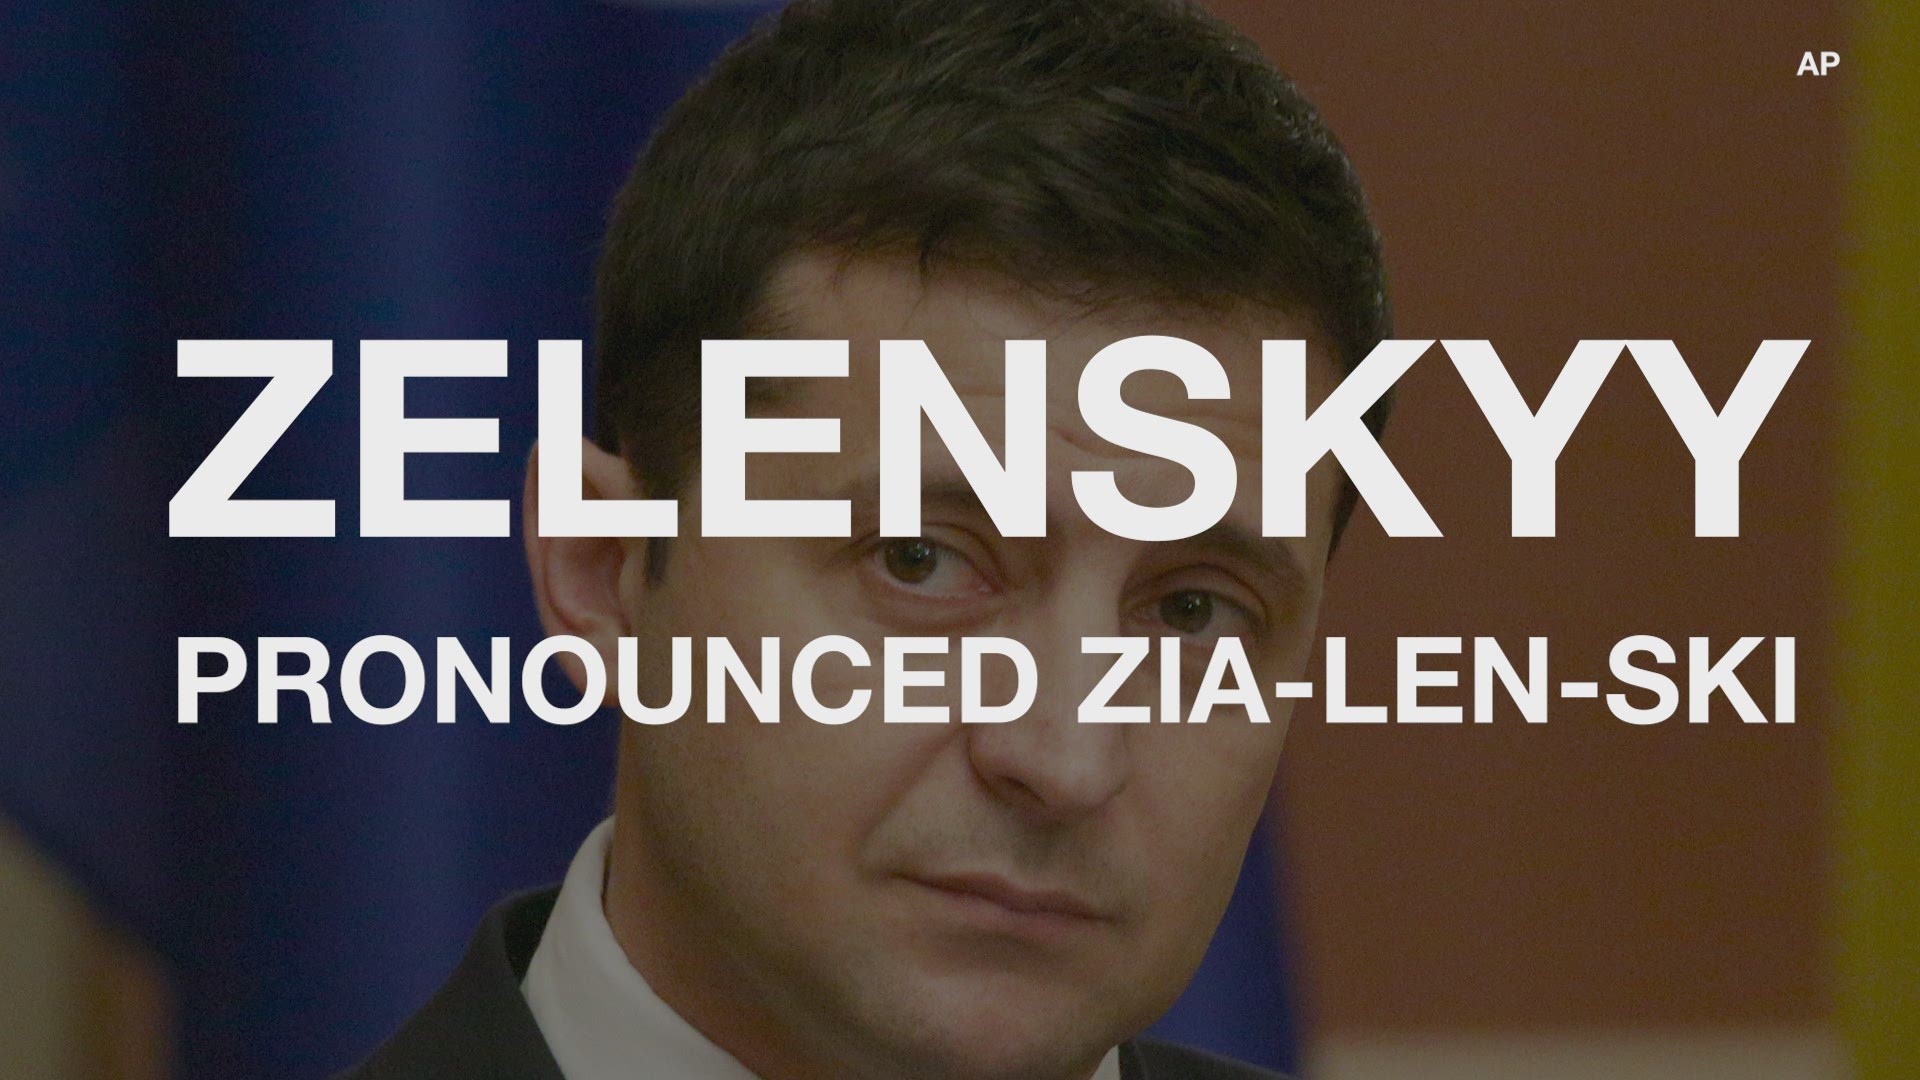 Learn how to pronounce the name of Ukraine's president.